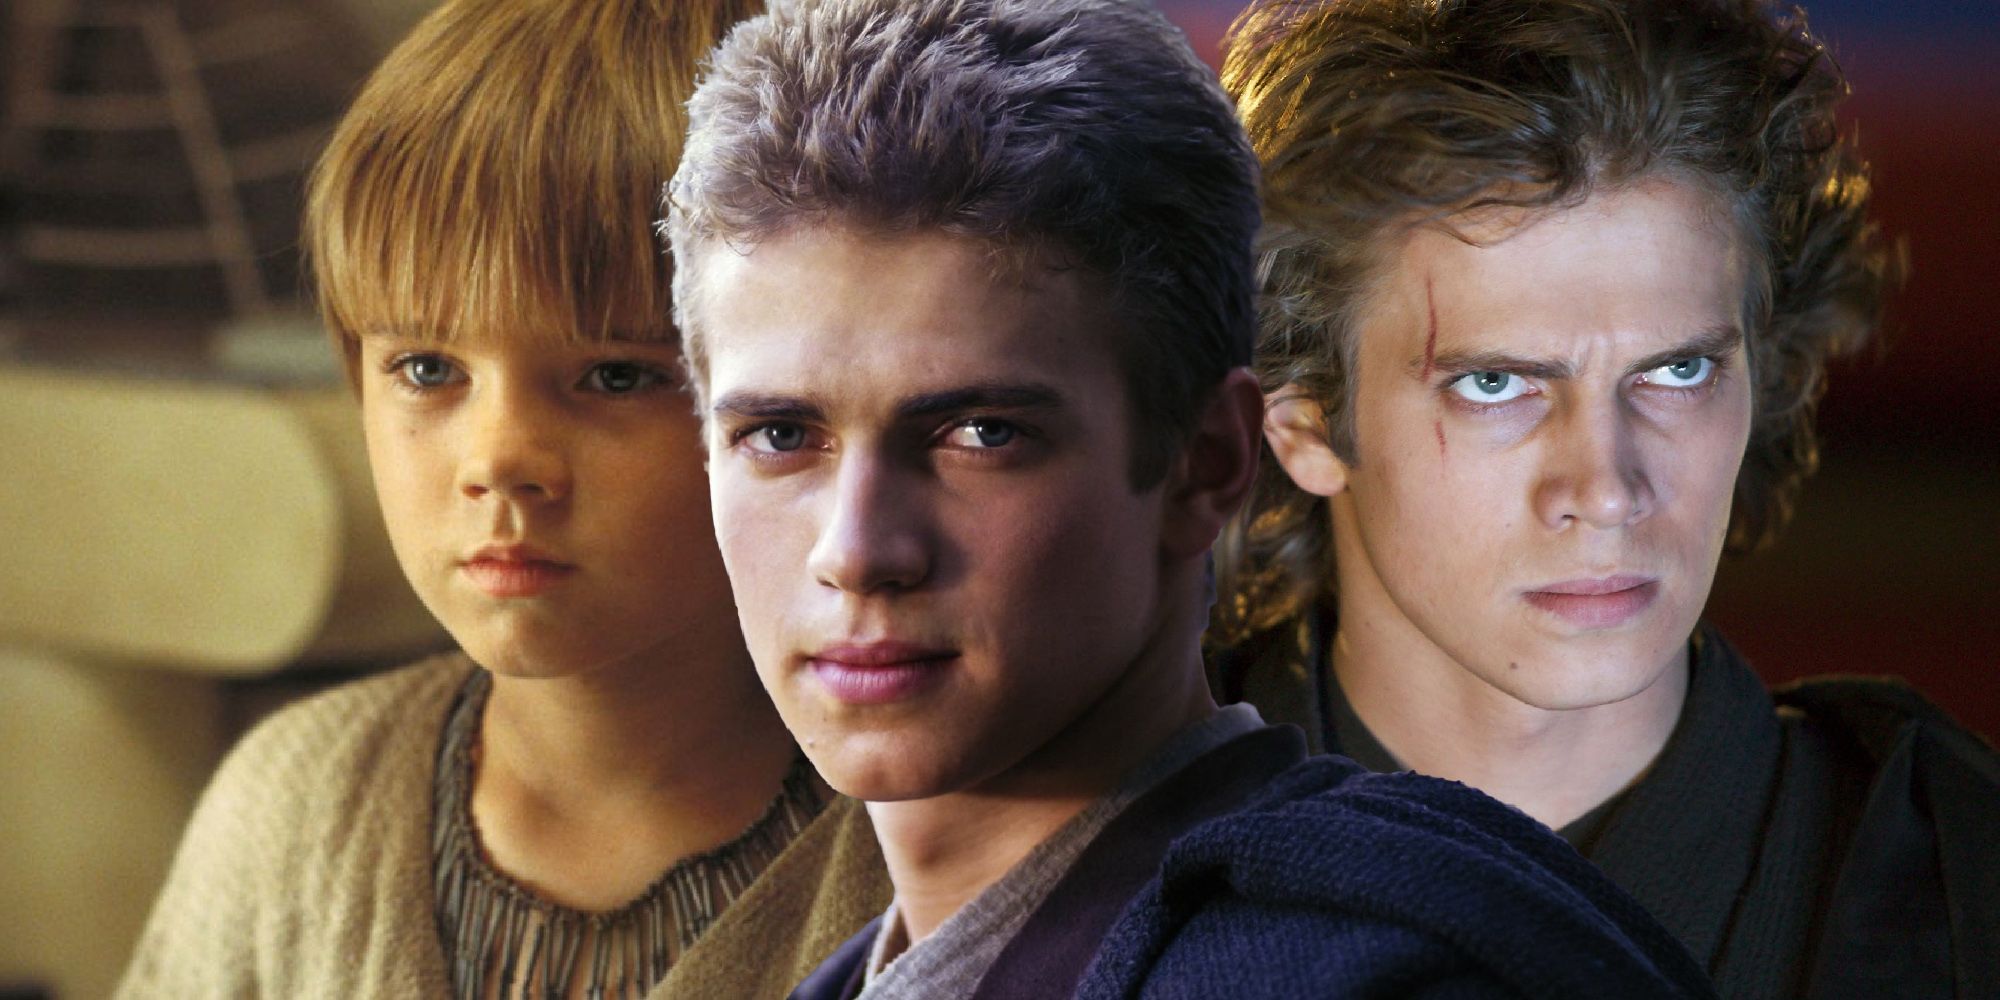 Jake Lloyd as young Anakin Skywalker to the left and Hayden Christensen as Anakin in Attack of the Clones in the middle and Revenge of the Sith to the right